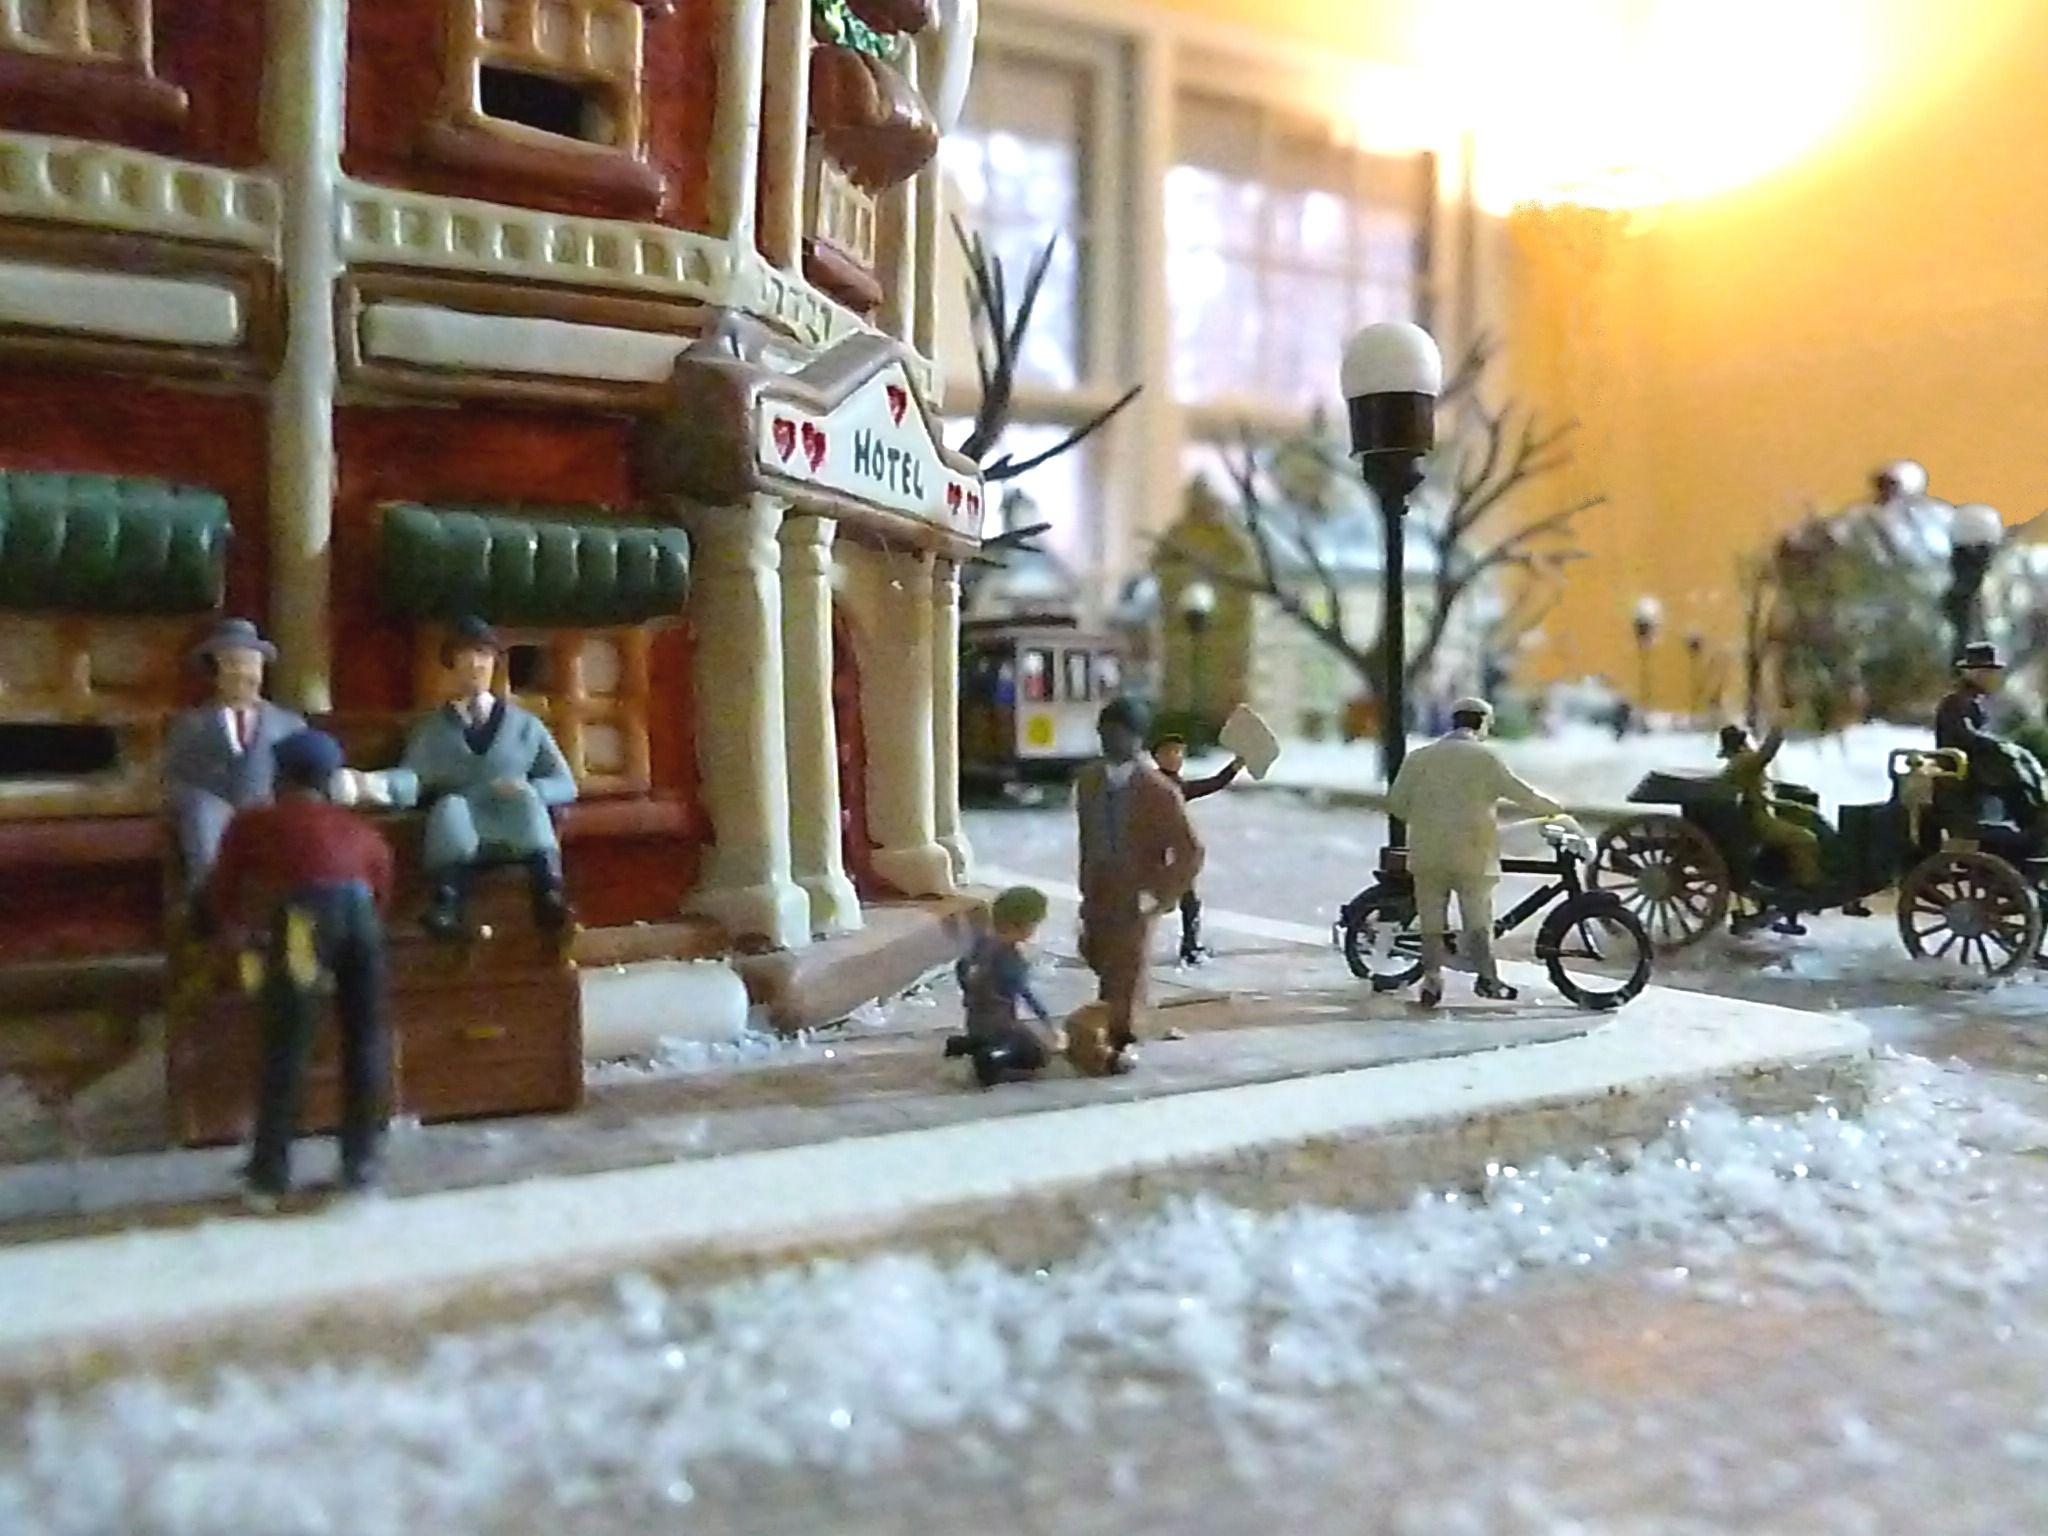 ho scale christmas village. Oak Valley, a Miniature Town in 1912